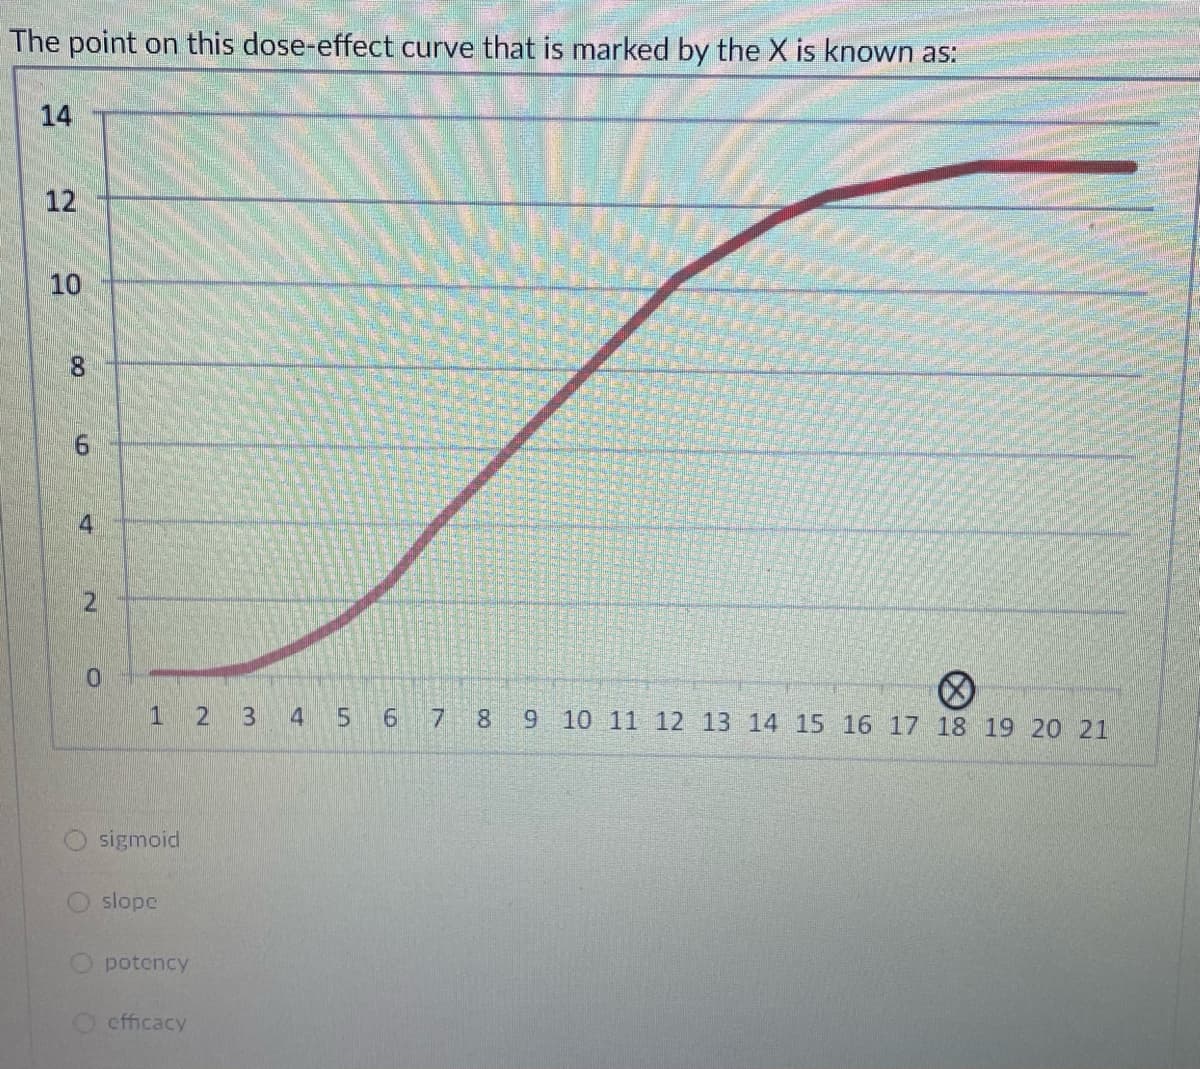 The point on this dose-effect curve that is marked by the X is known as:
14
12
10
8.
4
2.
1 2 3 4 5 6 7 8
9 10 11 12 13 14 15 16 17 18 19 20 21
sigmoid
slope
potency
O cfficacy
